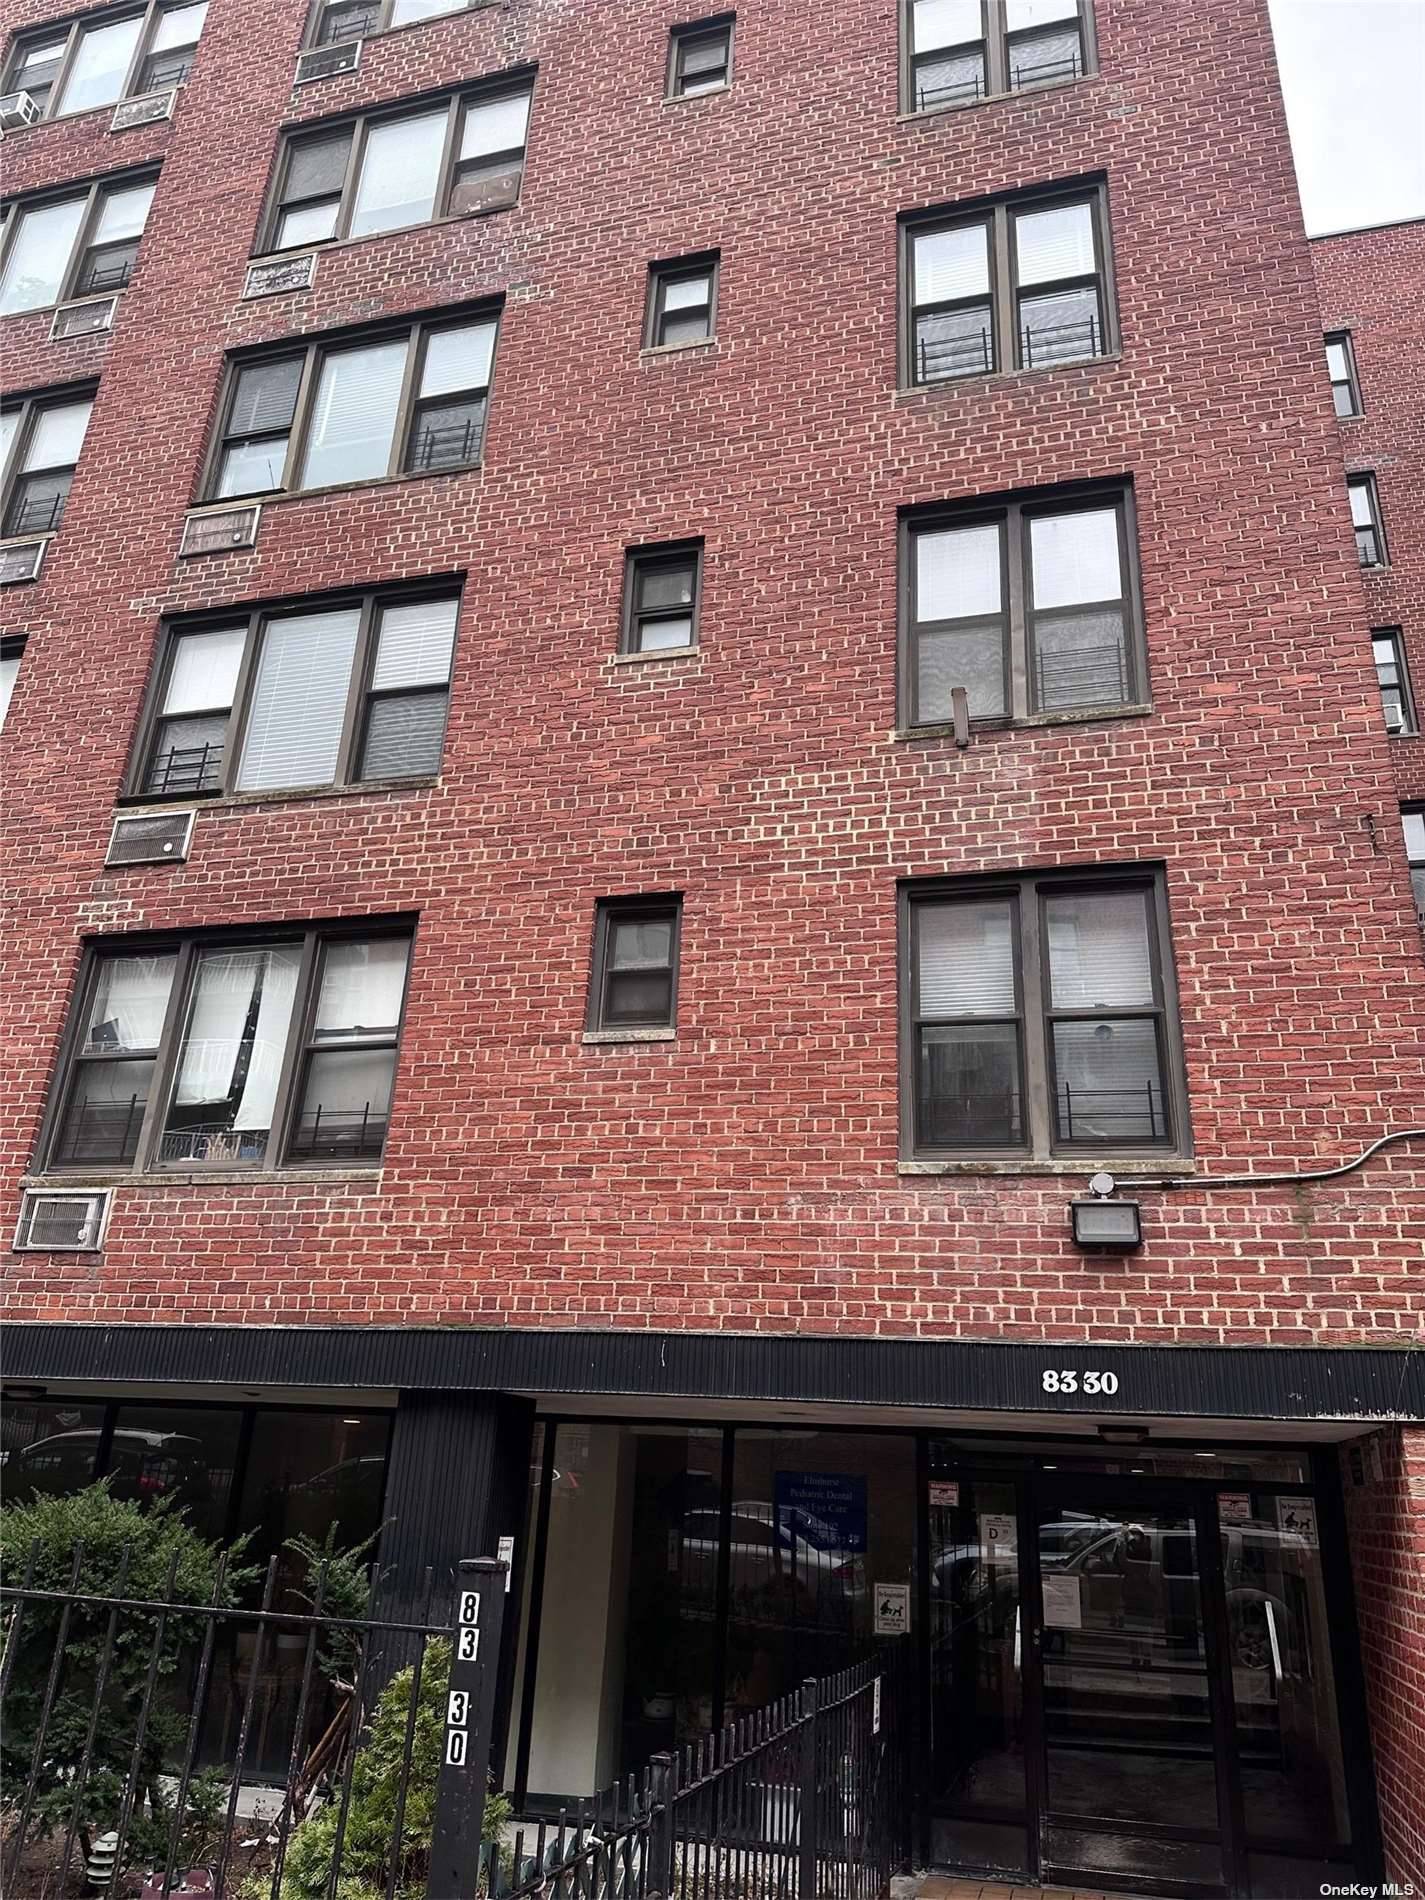 Locate A center of the elmhurst with excellent condition and location, large 2 brs Apt, convert 3 brs Apt.